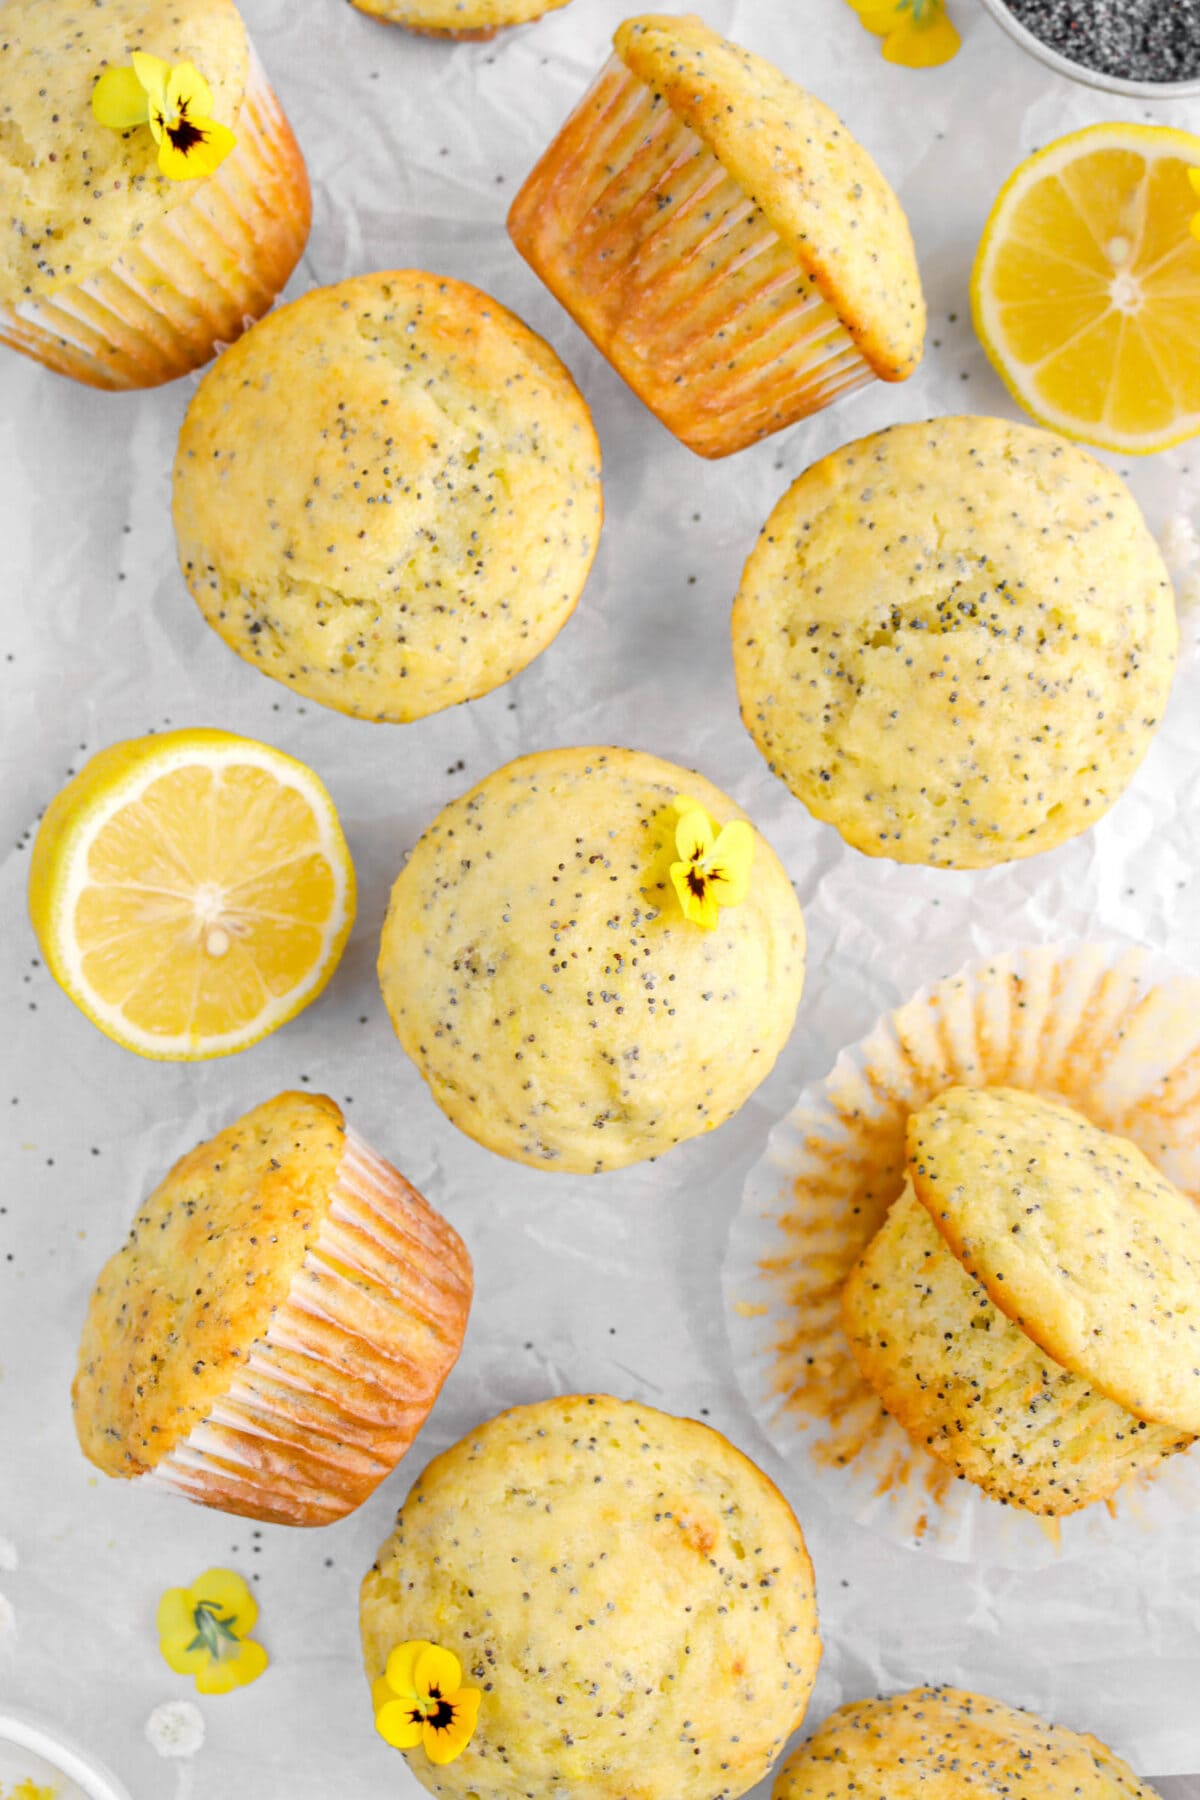 lemon poppy seed muffins on parchment paper with lemon halves and yellow pansies.